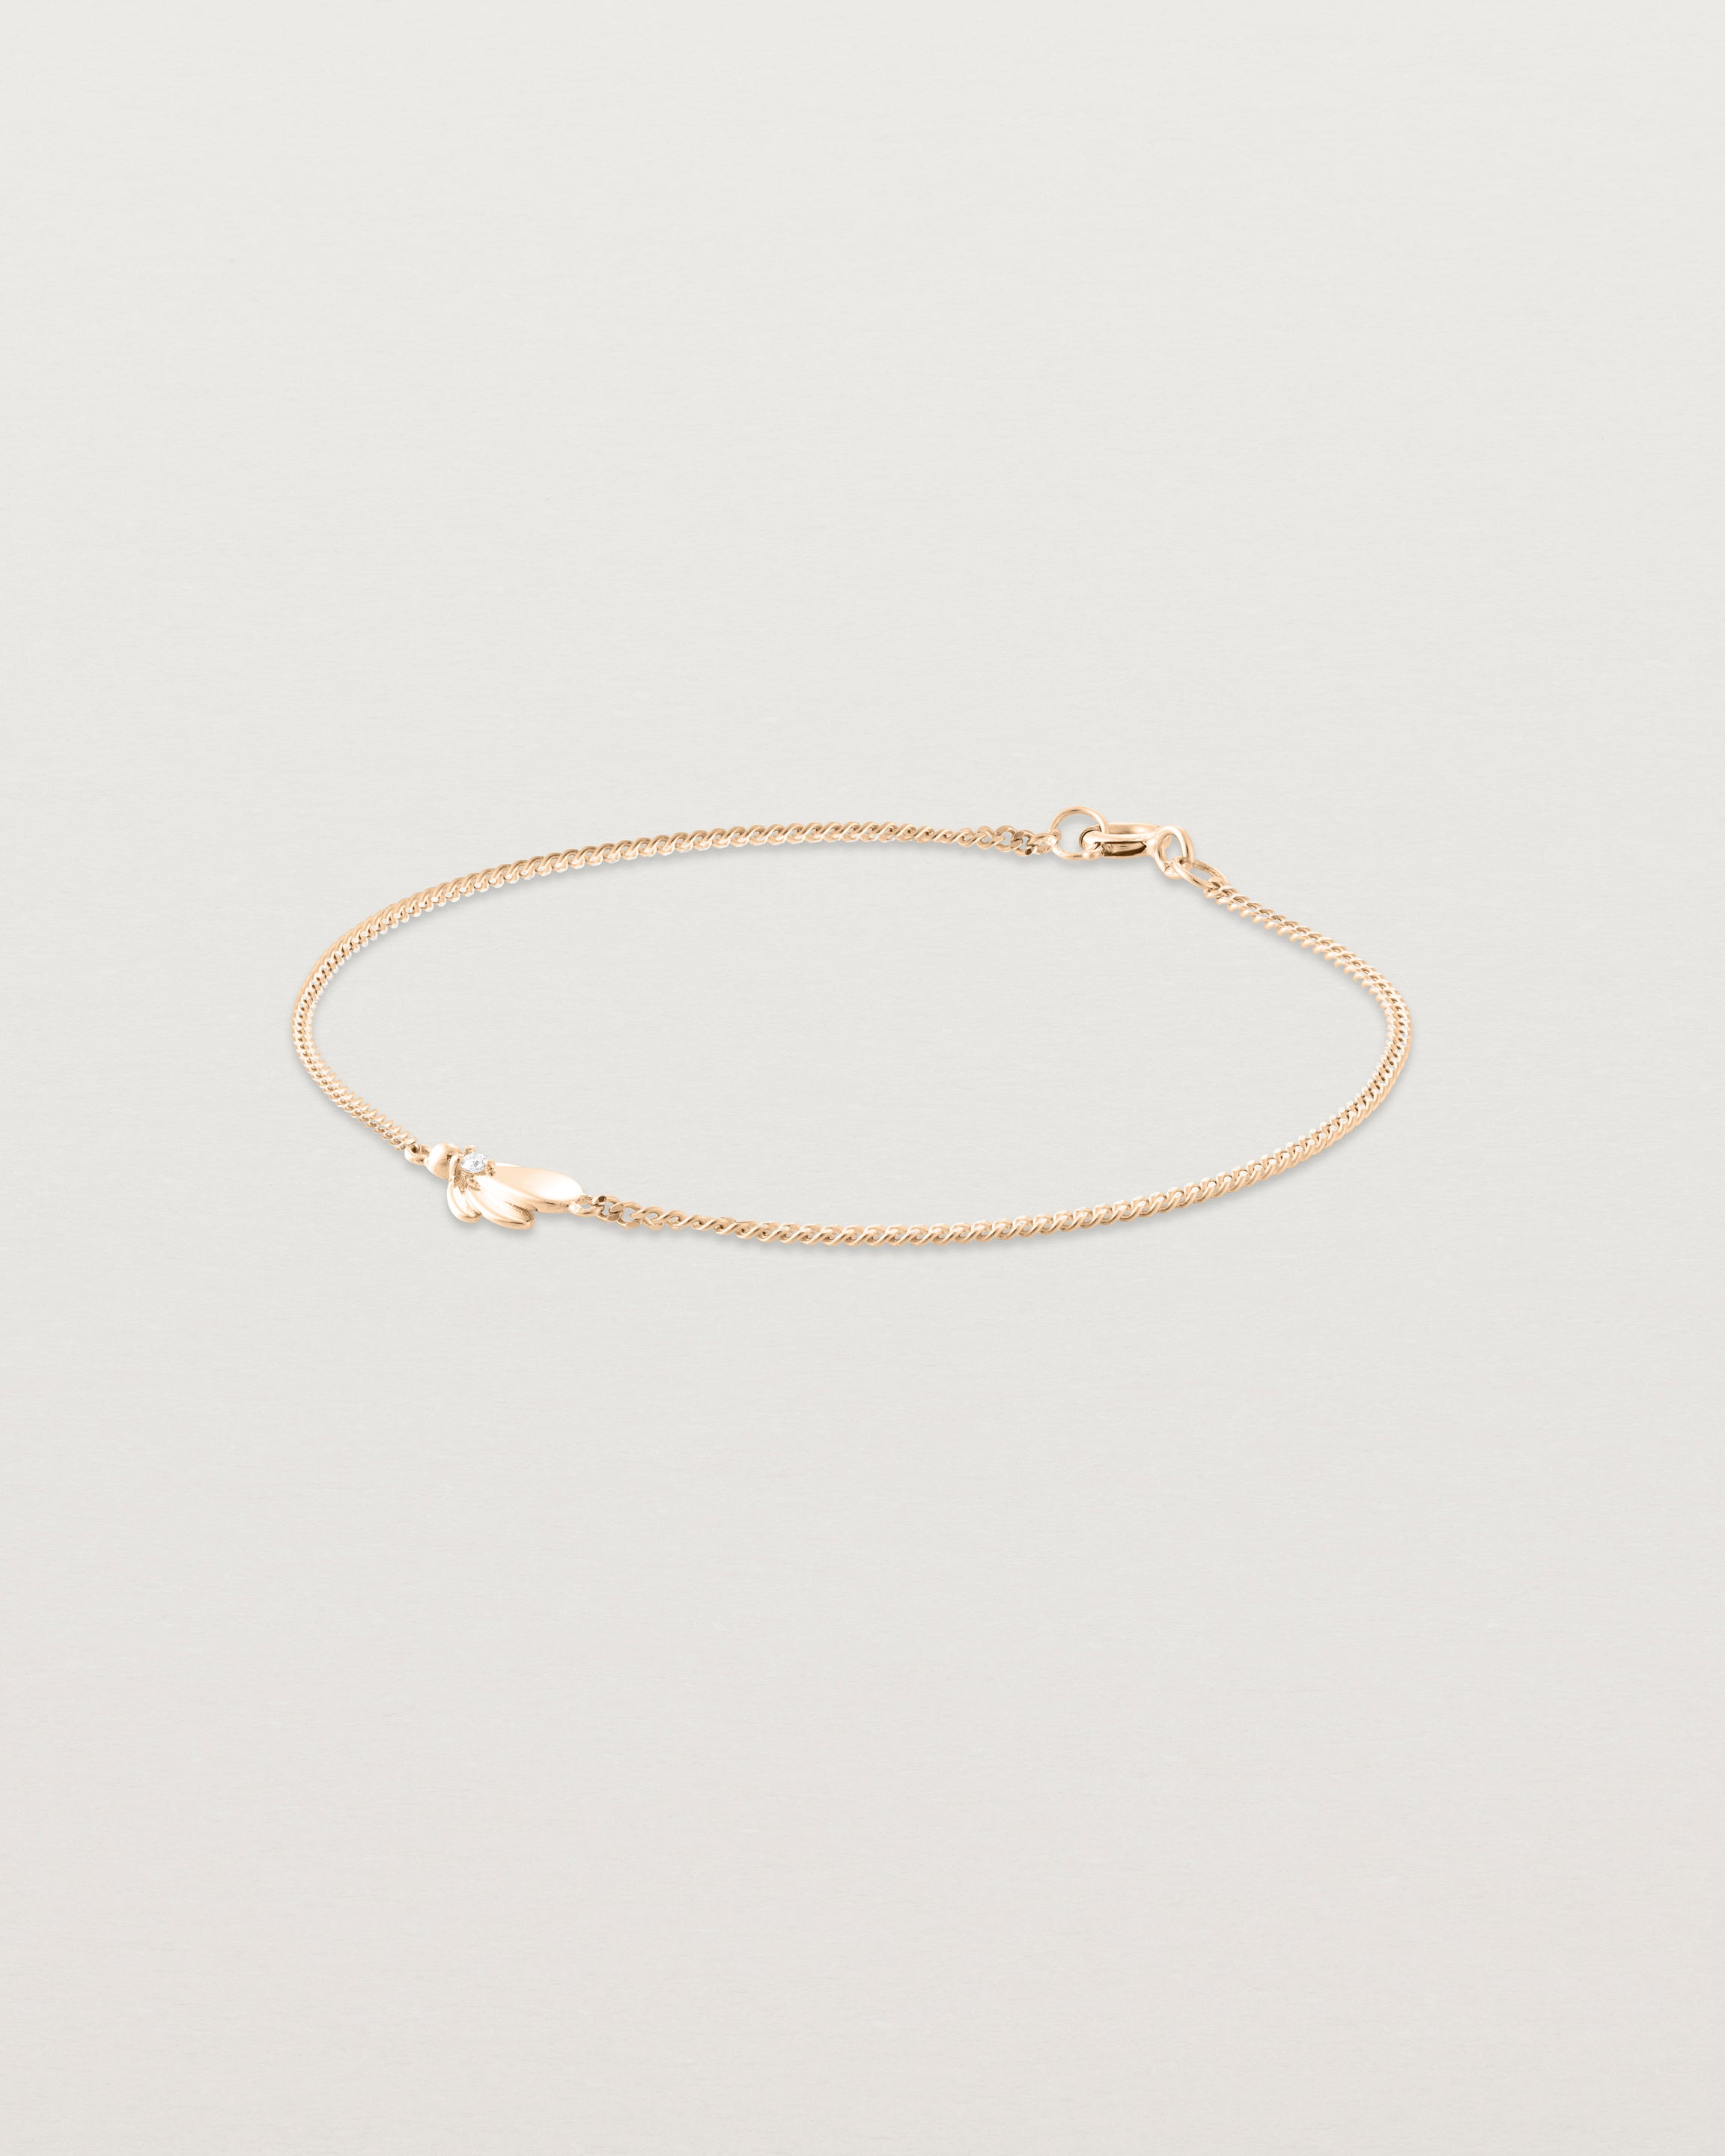 Angled view of the Aeris Bracelet | Diamond in Rose Gold.